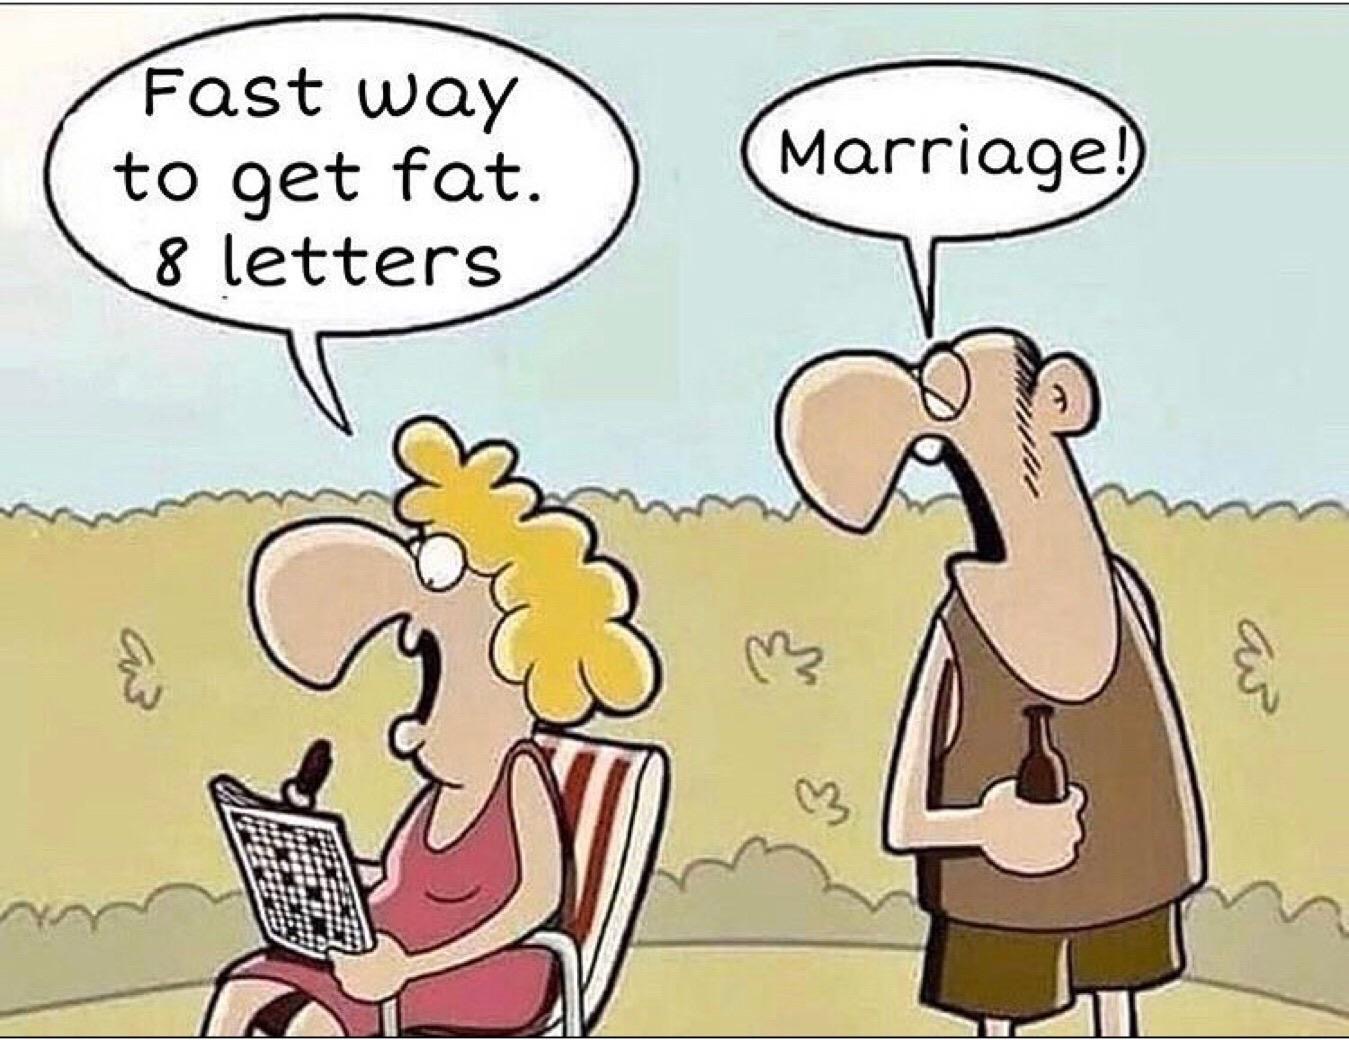 Fast way to get fat. 8 letters Marriage!